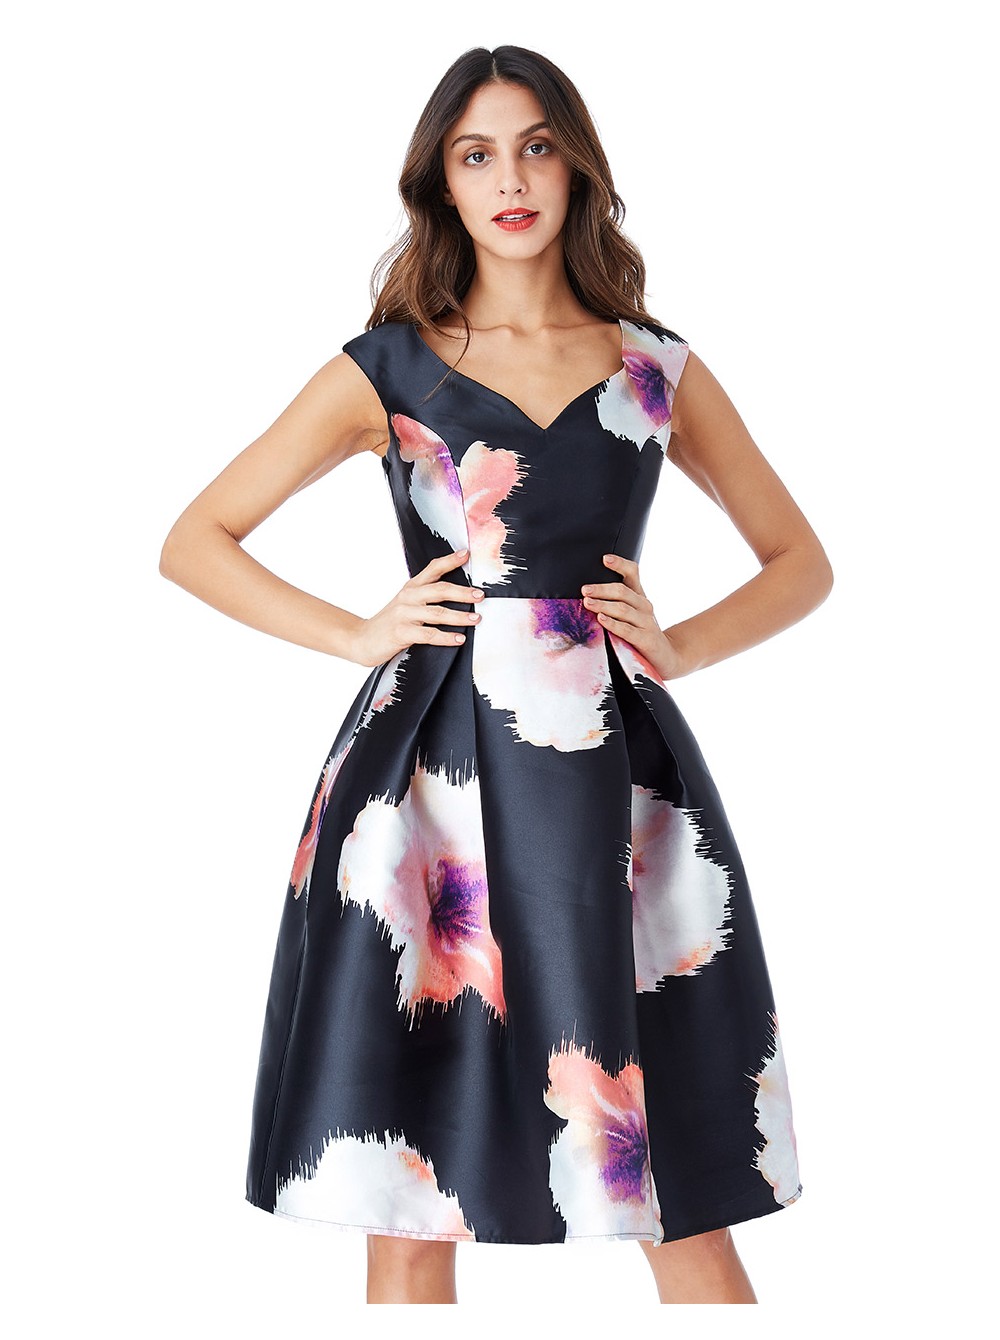 Share 134+ printed satin gown latest - camera.edu.vn